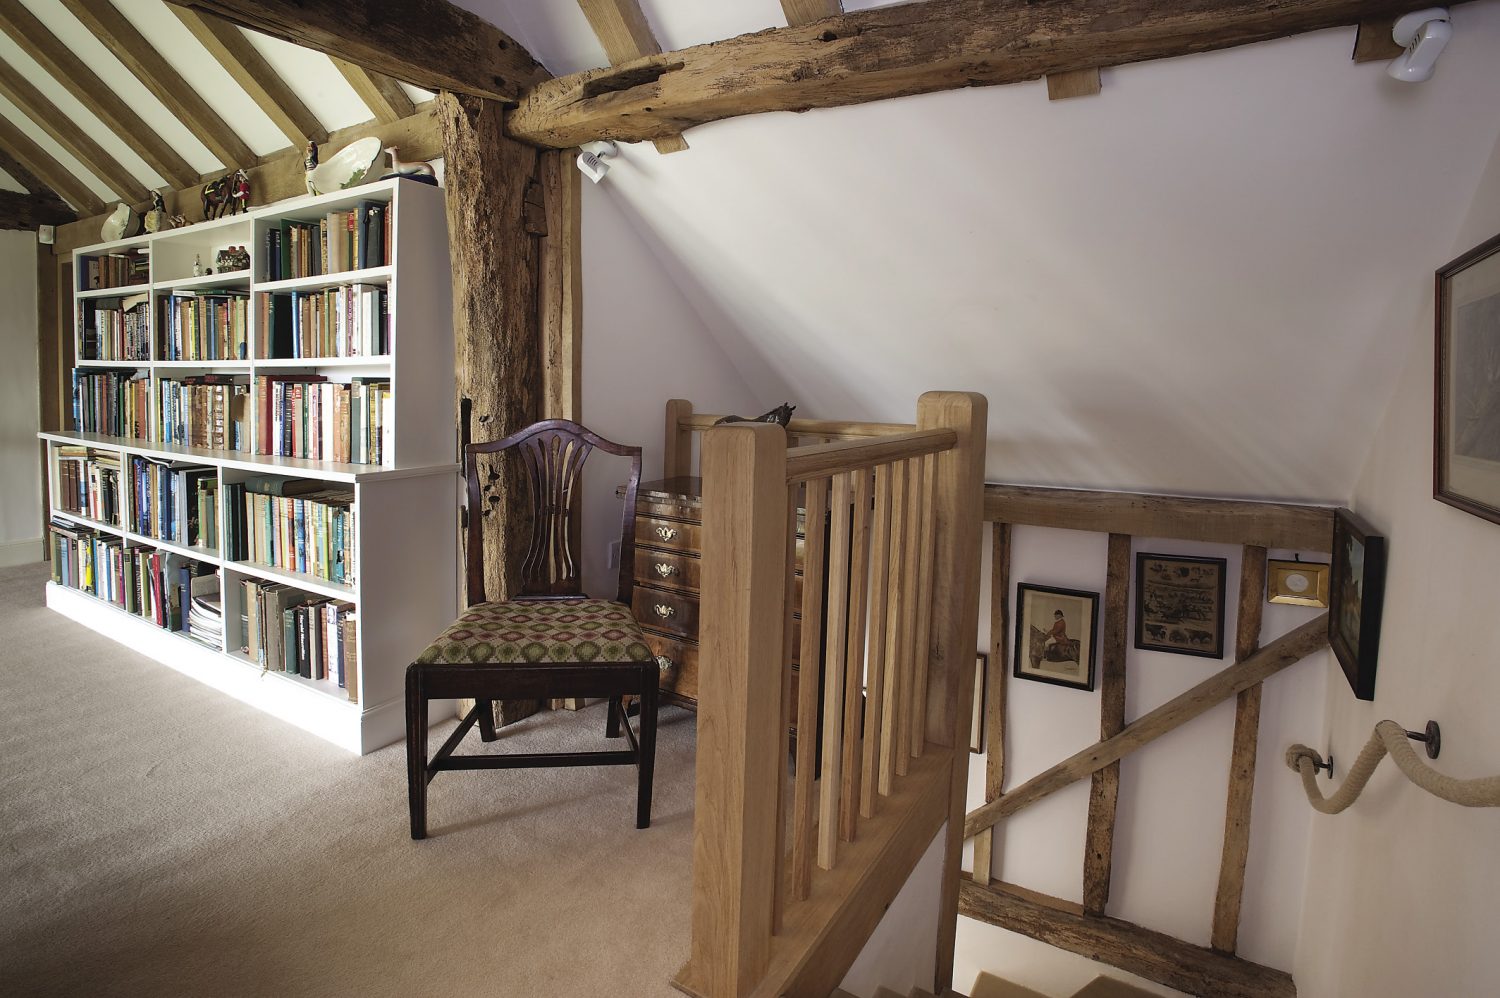 bookshelves made by Alpine Joinery of Frant stretch almost the length of the landing